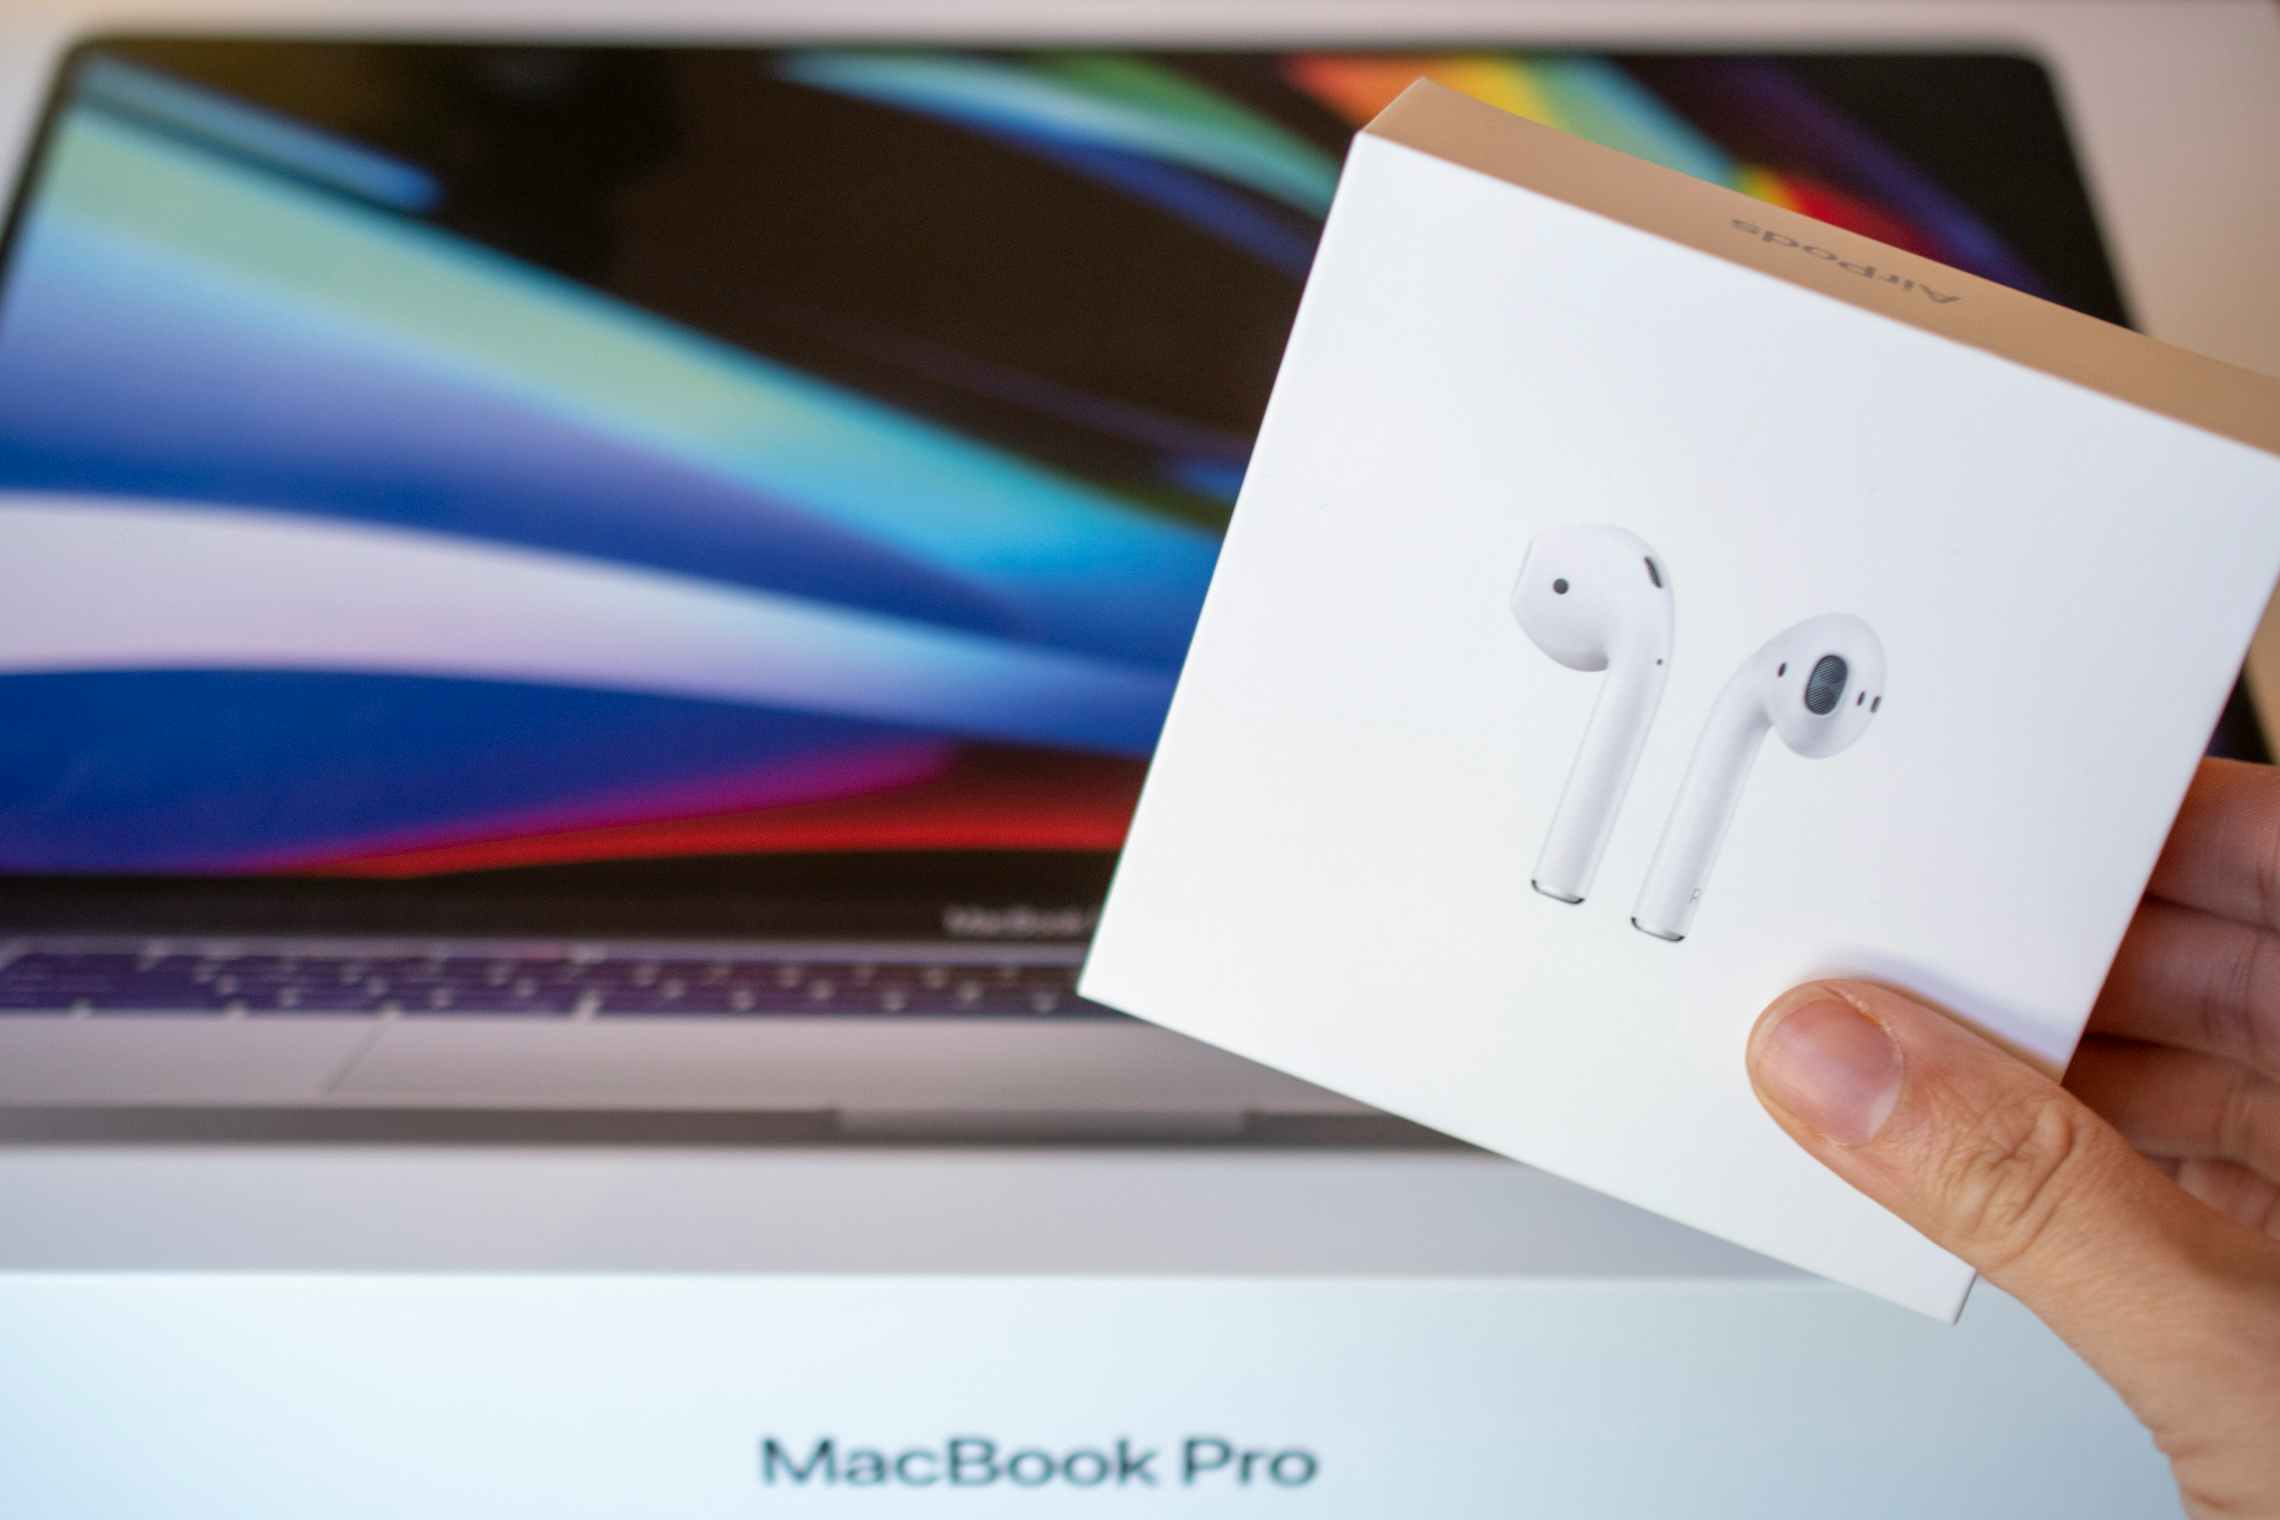 An Apple Airpods box being held in front of a Macbook Pro laptop computer.